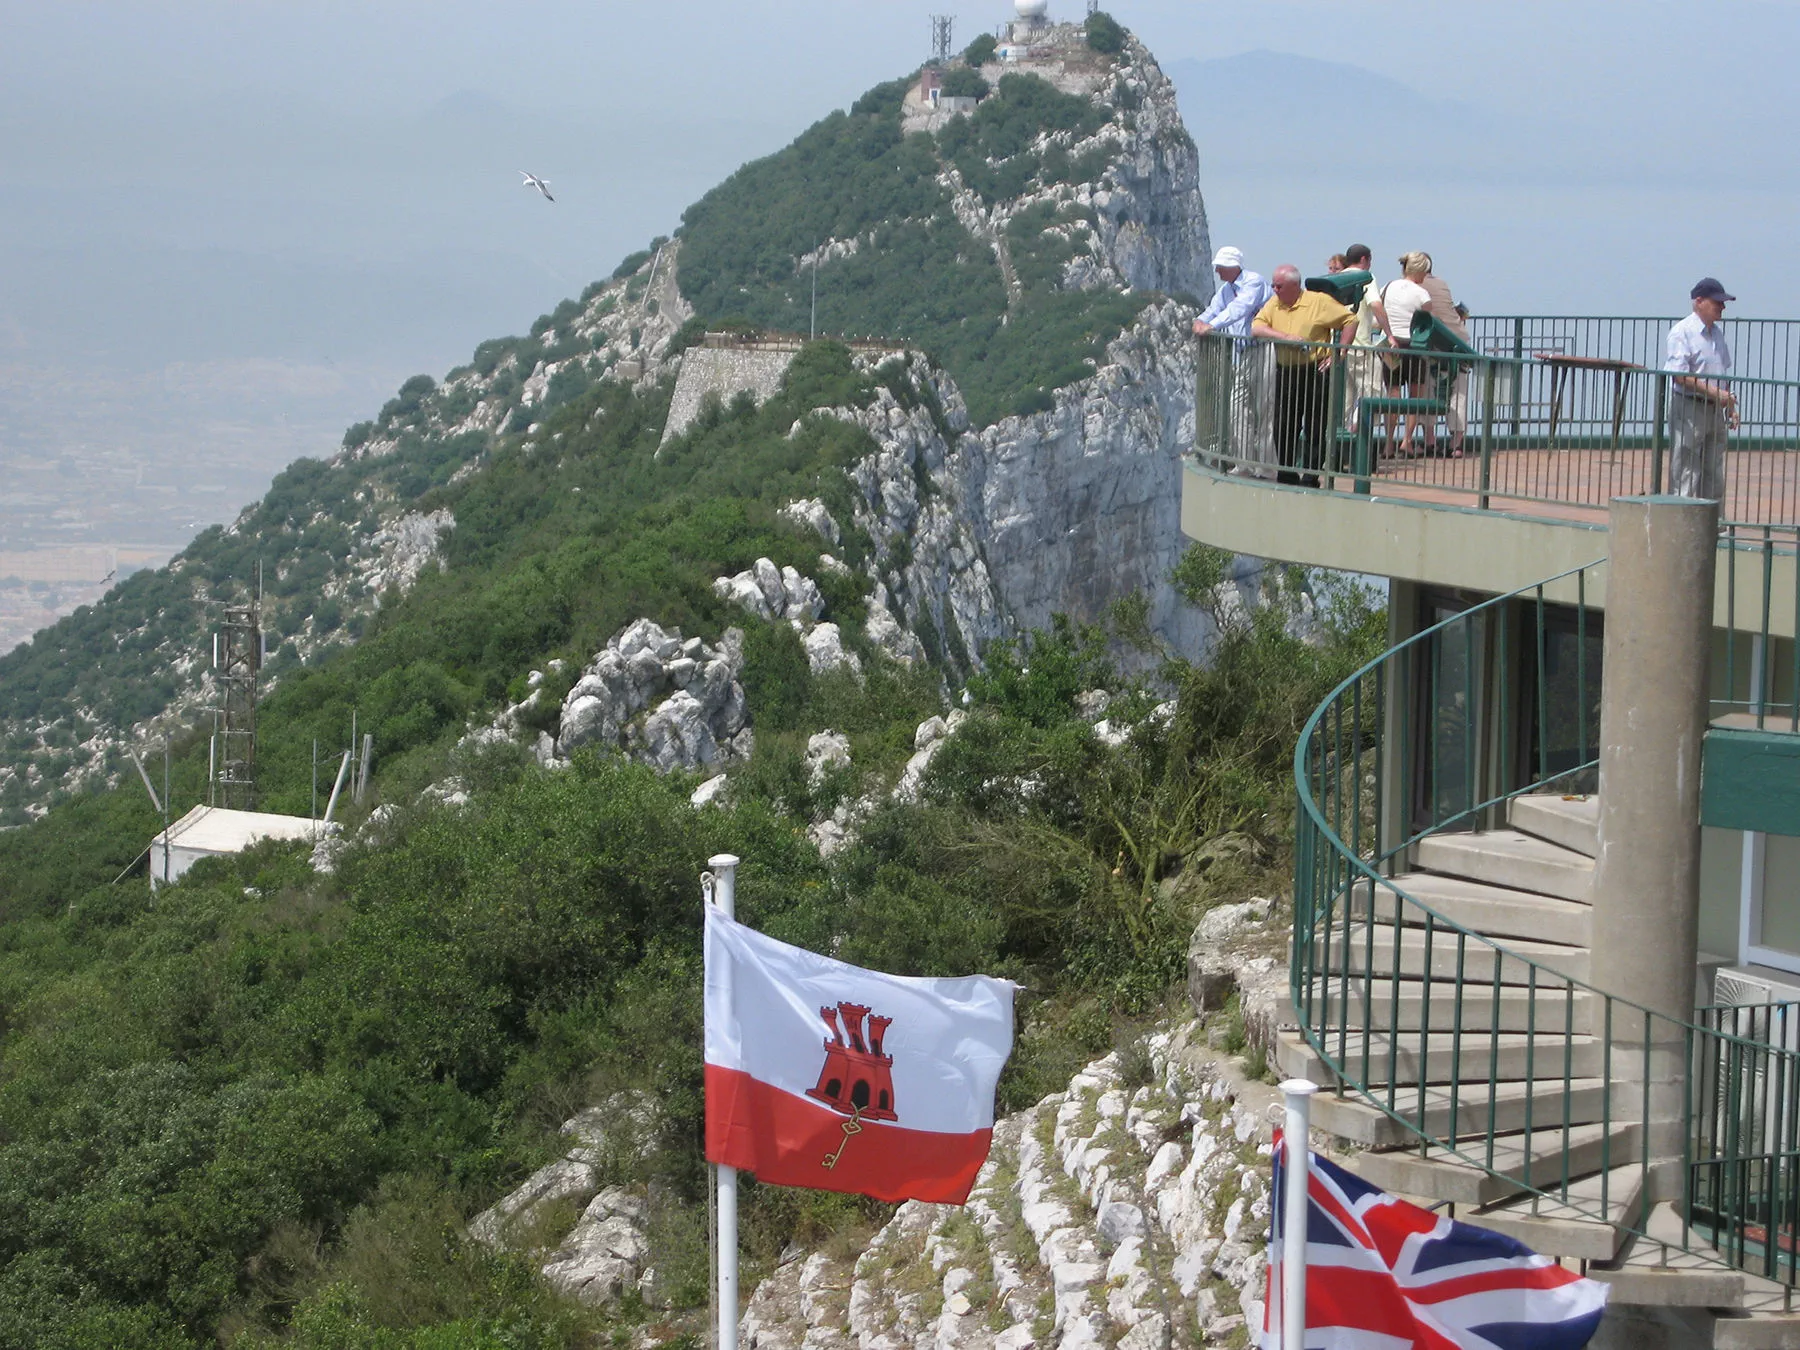 The views from the Rock of Gibraltar take in two continents, one ocean, and the Mediterranean Sea